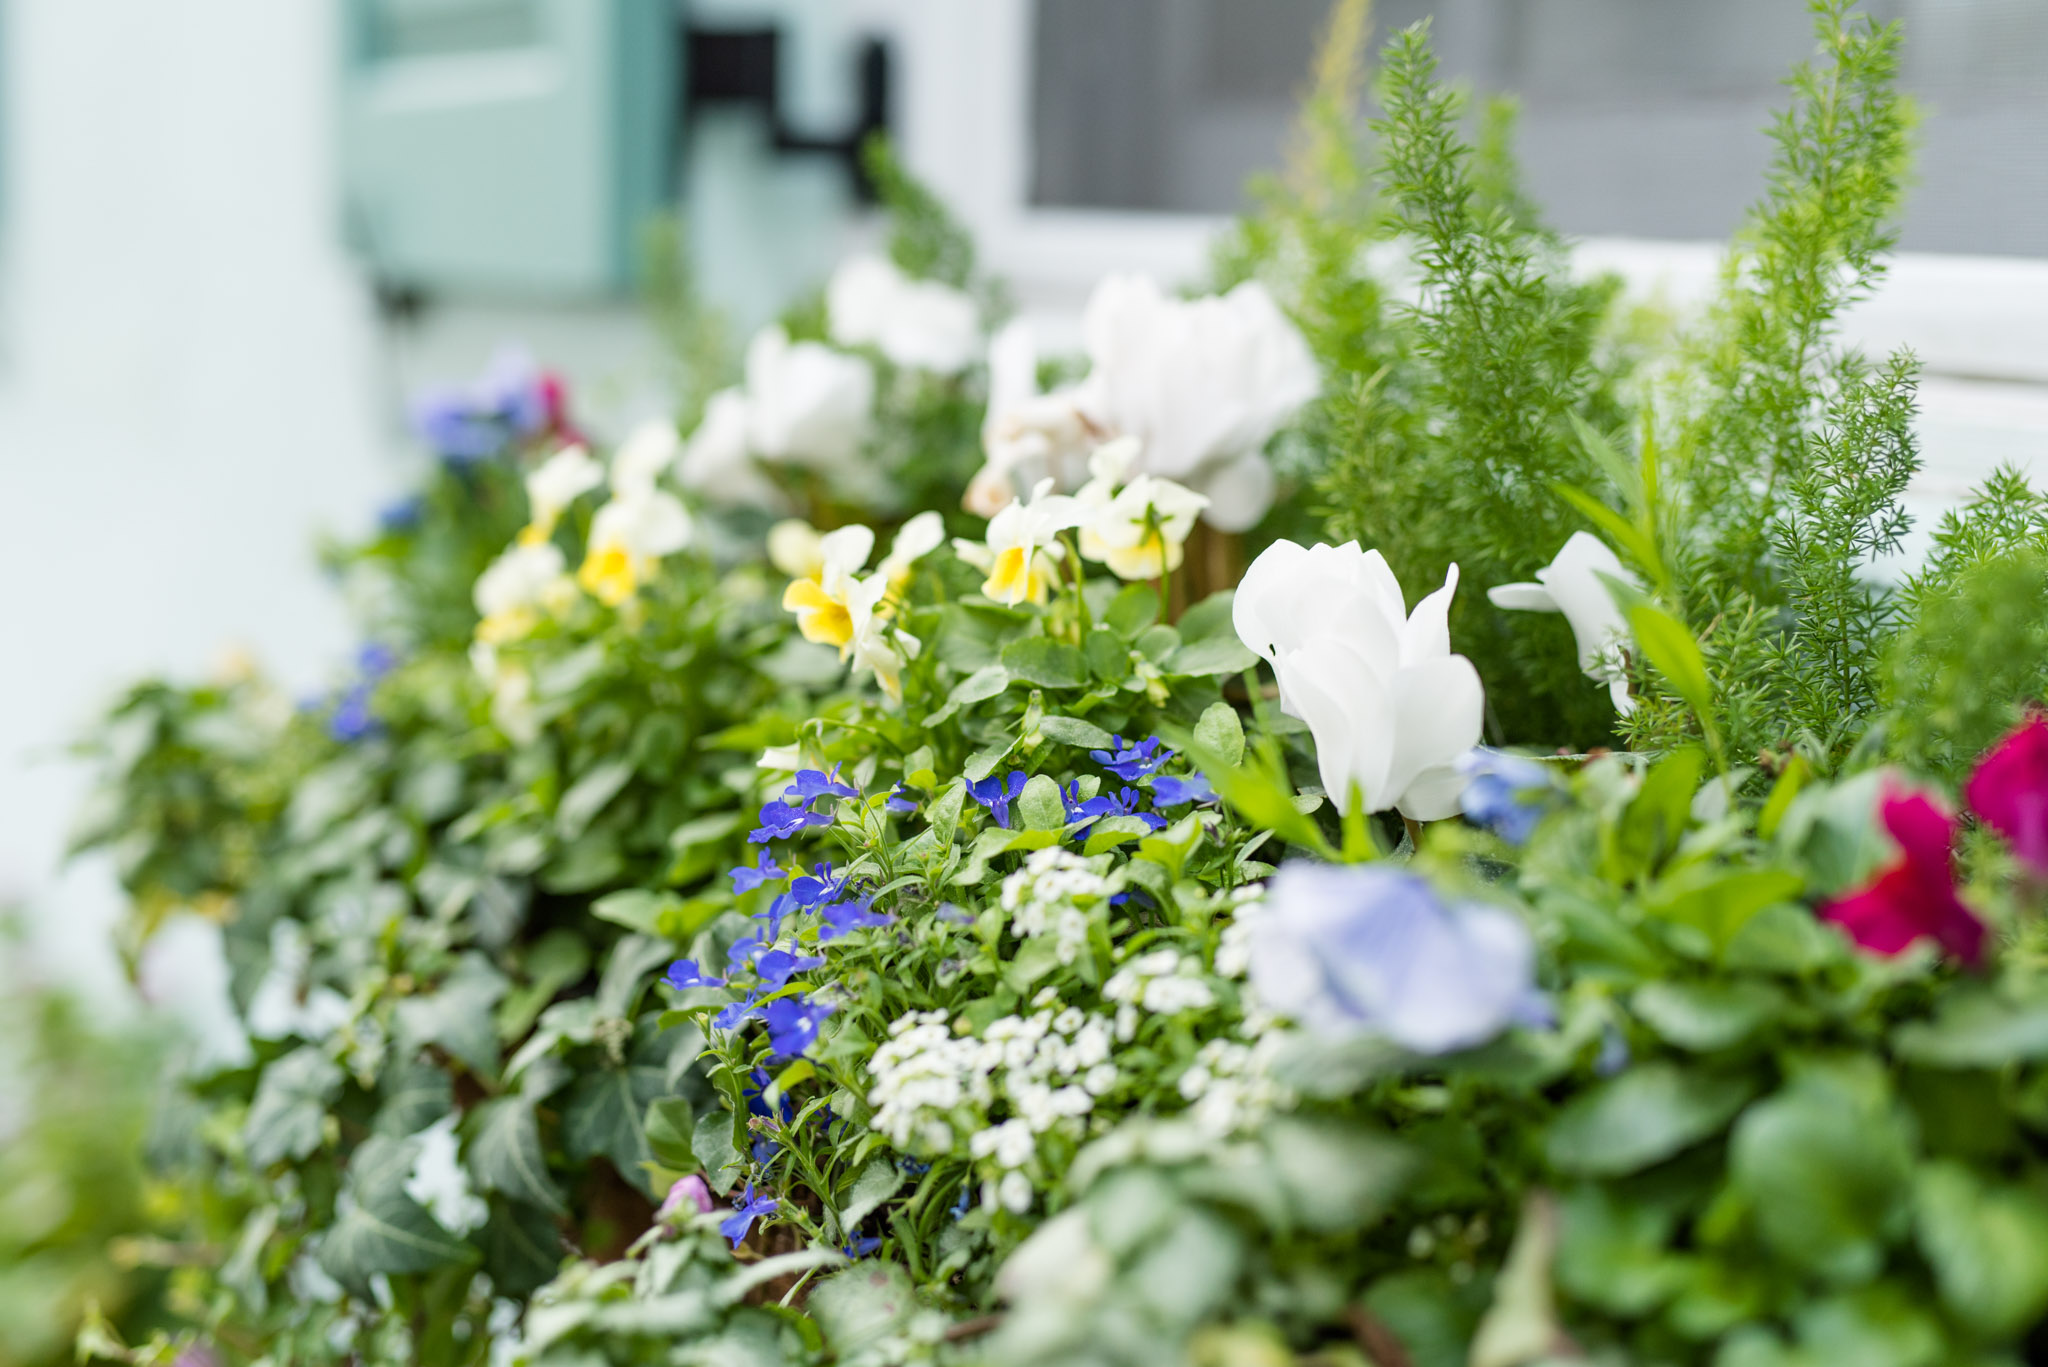 Purple and white flowers in planter box